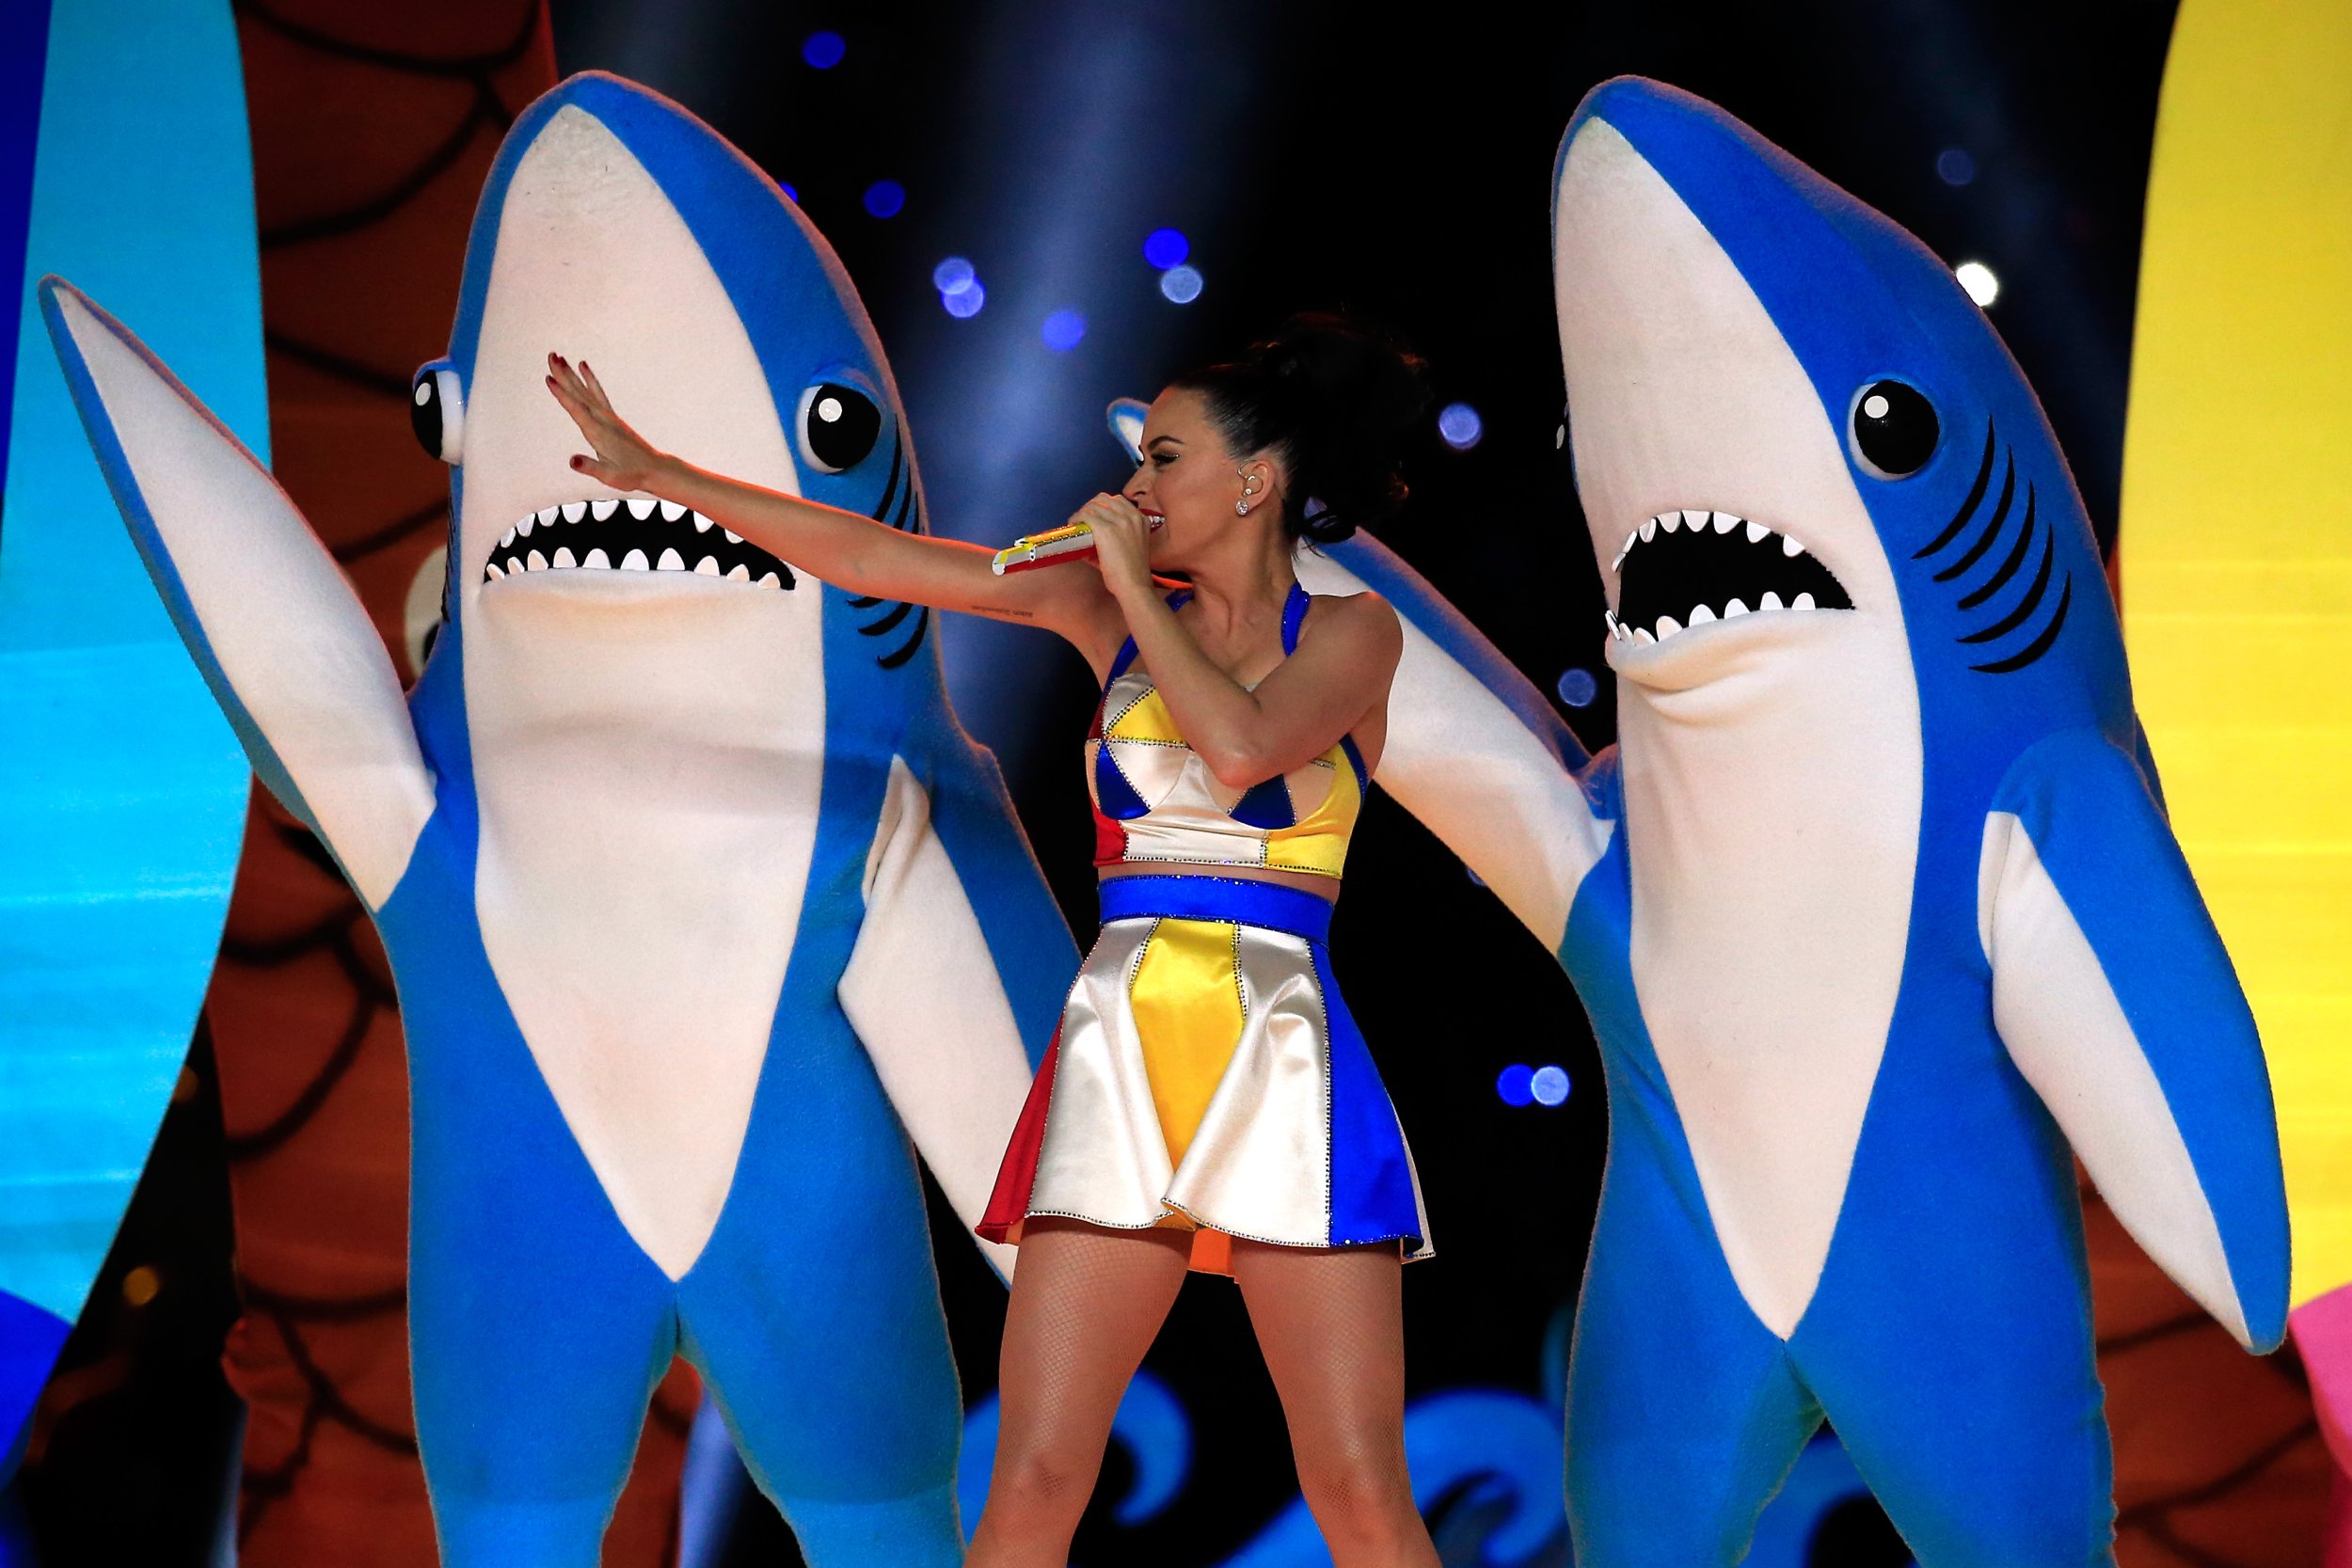 Best Super Bowl Halftime Performances 9 Of The Most Memorable Shows From Beyoncé To Janet